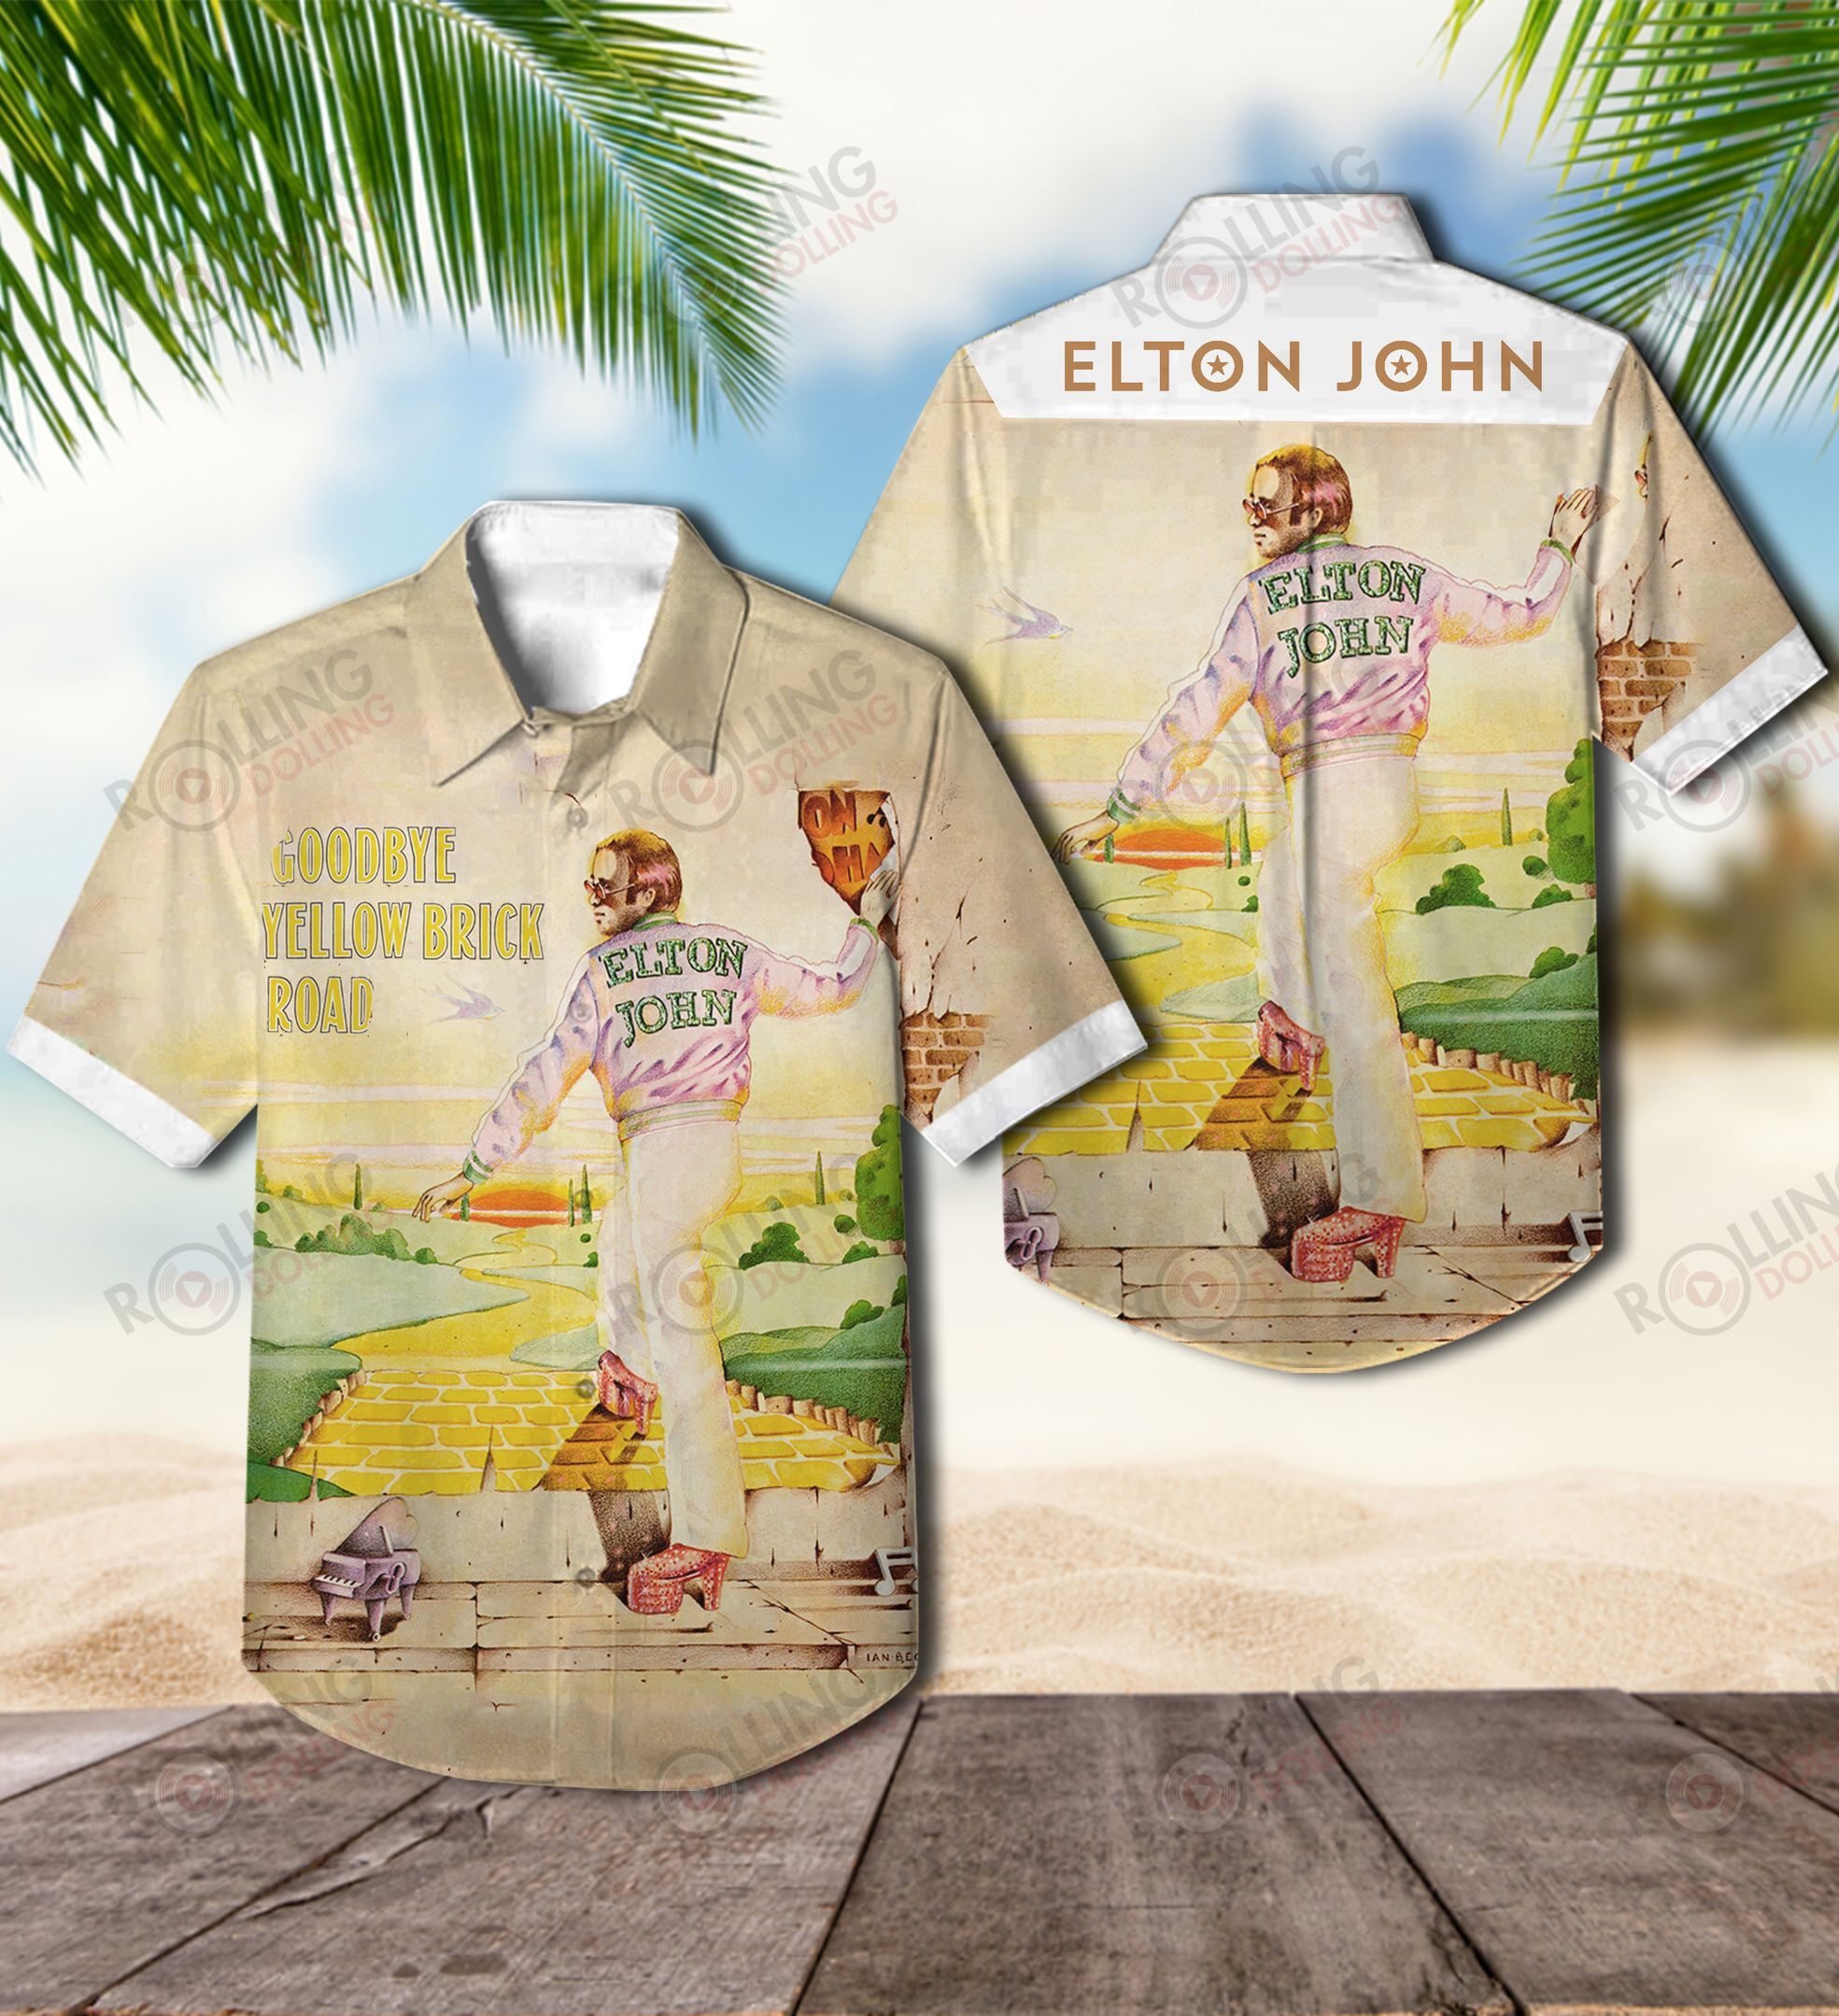 This would make a great gift for any fan who loves Hawaiian Shirt as well as Rock band 79